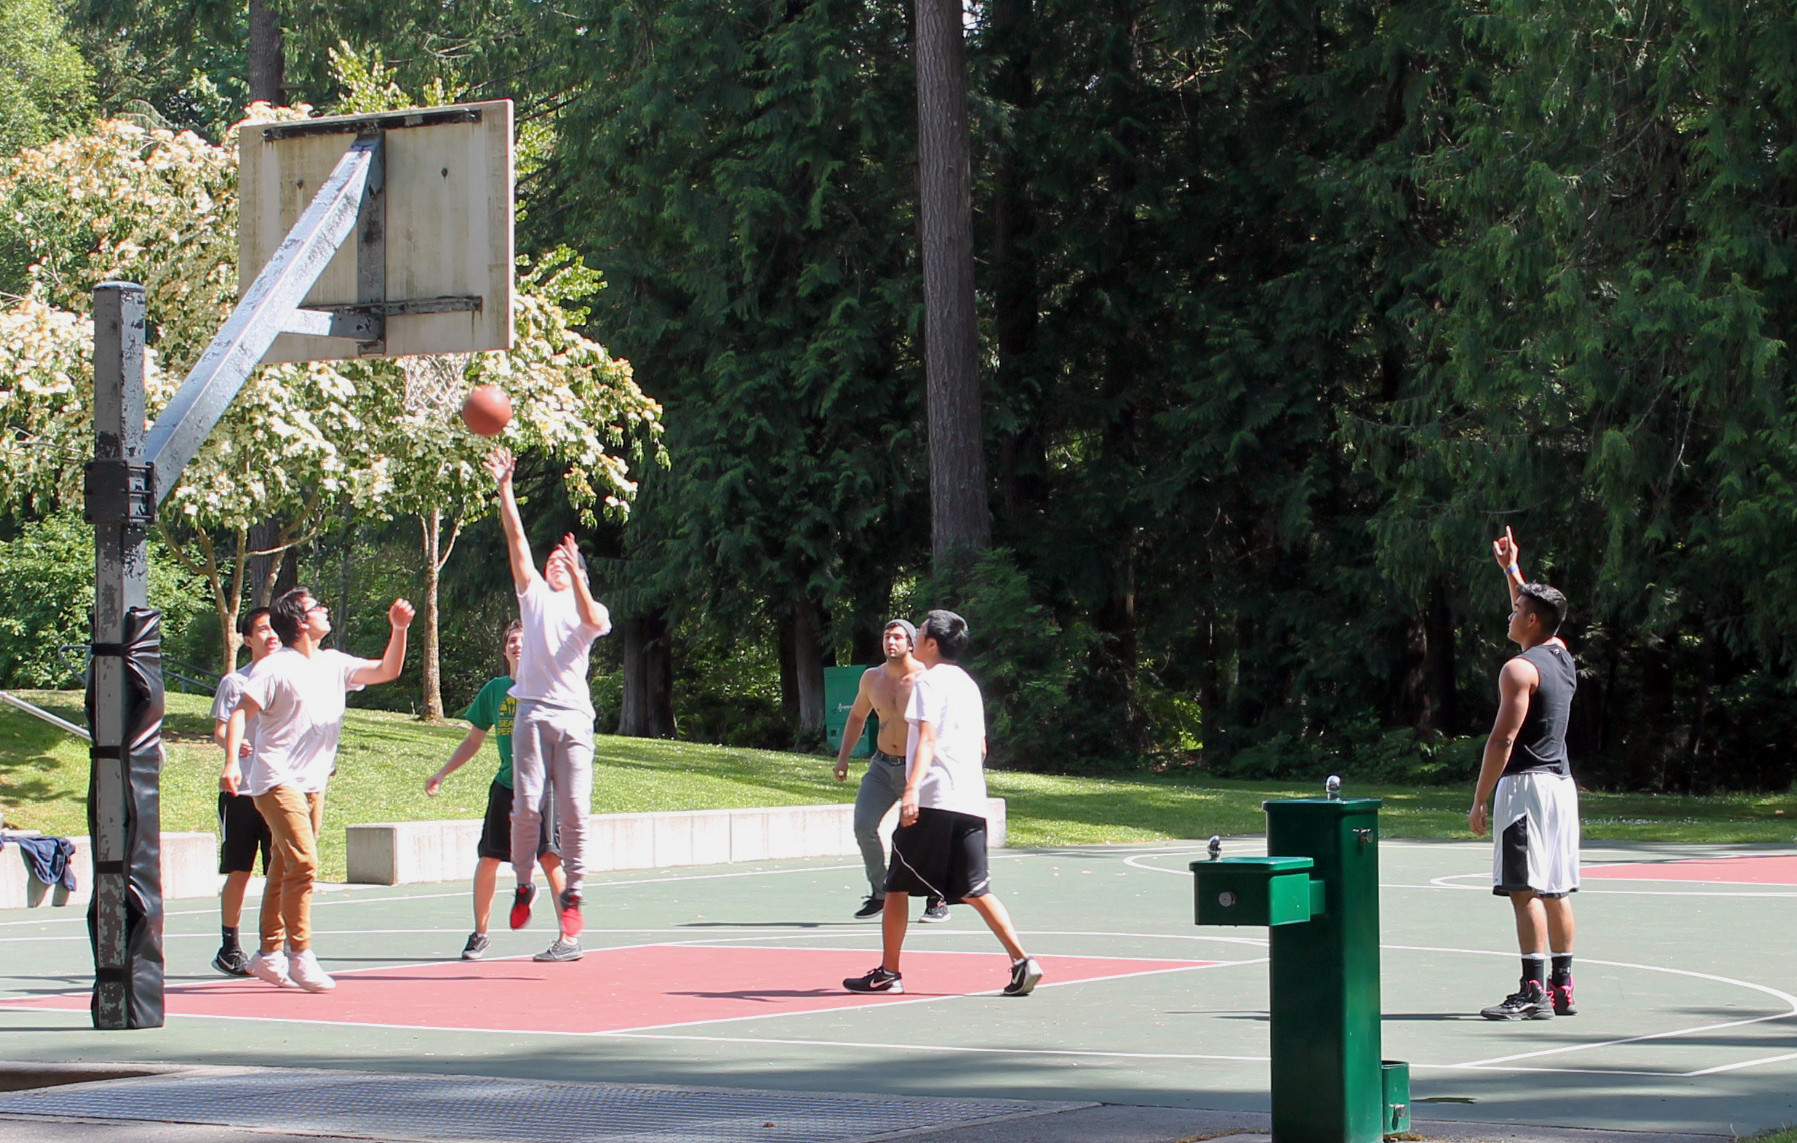 A group of young people in street wear plays basketball at pine lake park on a sunny day. There is an accessible drinking fountain next to the court.